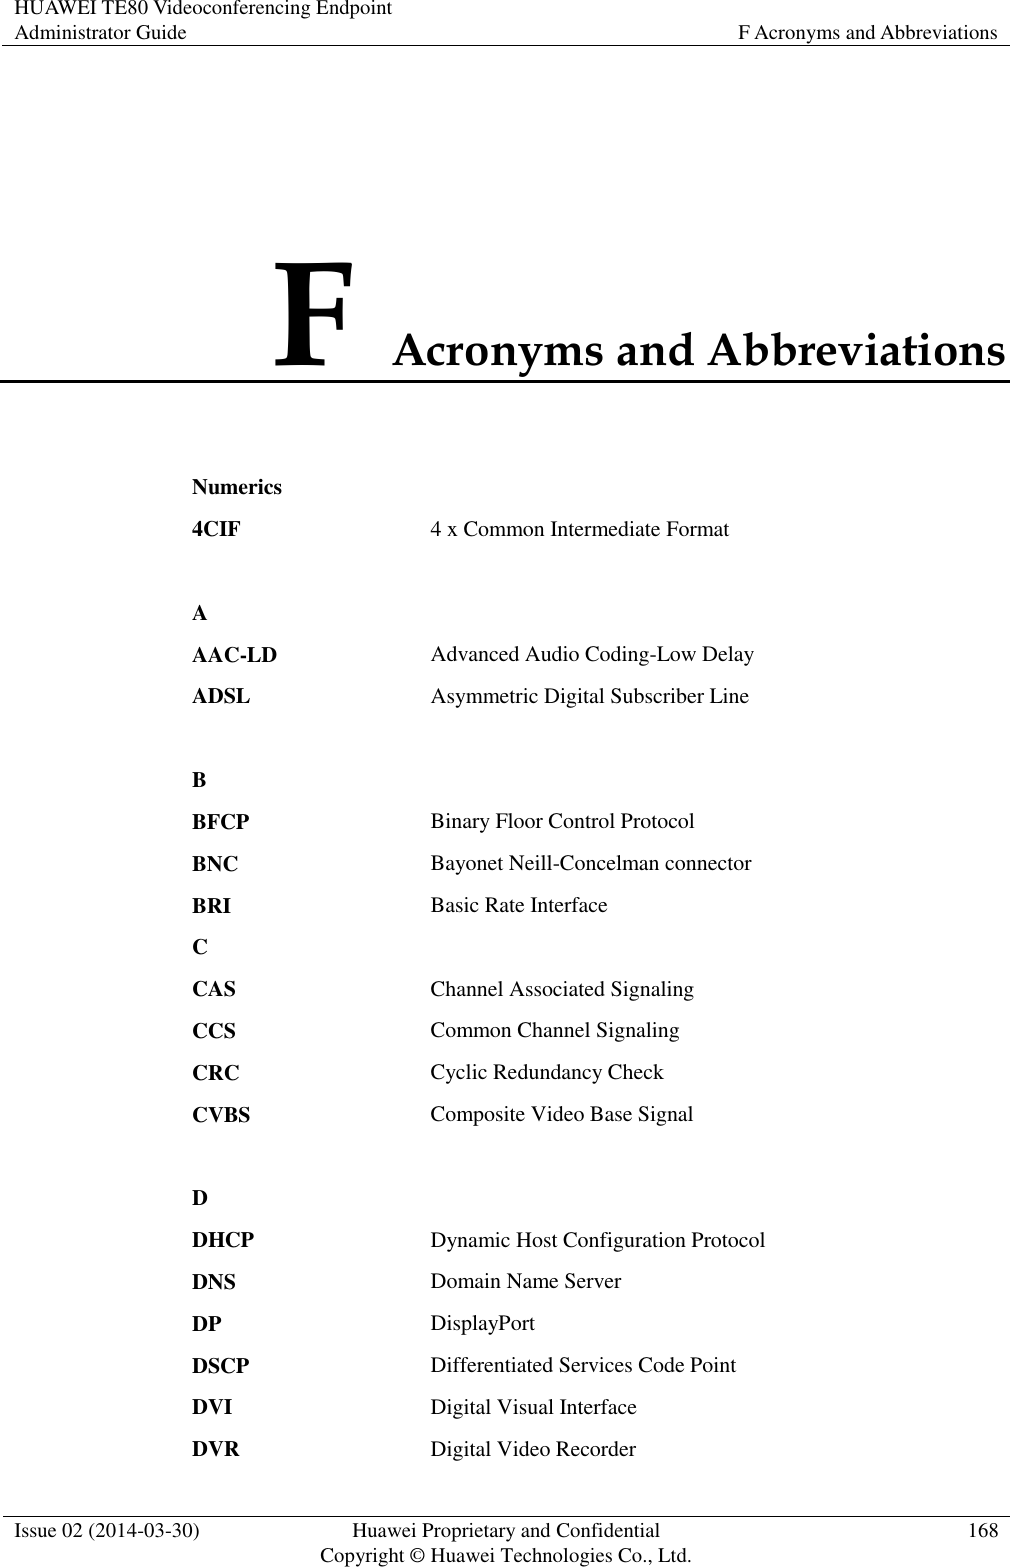 HUAWEI TE80 Videoconferencing Endpoint Administrator Guide F Acronyms and Abbreviations  Issue 02 (2014-03-30) Huawei Proprietary and Confidential Copyright © Huawei Technologies Co., Ltd. 168  F Acronyms and Abbreviations Numerics  4CIF 4 x Common Intermediate Format   A  AAC-LD Advanced Audio Coding-Low Delay ADSL Asymmetric Digital Subscriber Line   B  BFCP Binary Floor Control Protocol BNC Bayonet Neill-Concelman connector BRI Basic Rate Interface C  CAS Channel Associated Signaling CCS Common Channel Signaling CRC Cyclic Redundancy Check CVBS Composite Video Base Signal   D  DHCP Dynamic Host Configuration Protocol DNS Domain Name Server DP DisplayPort DSCP Differentiated Services Code Point DVI Digital Visual Interface DVR Digital Video Recorder 